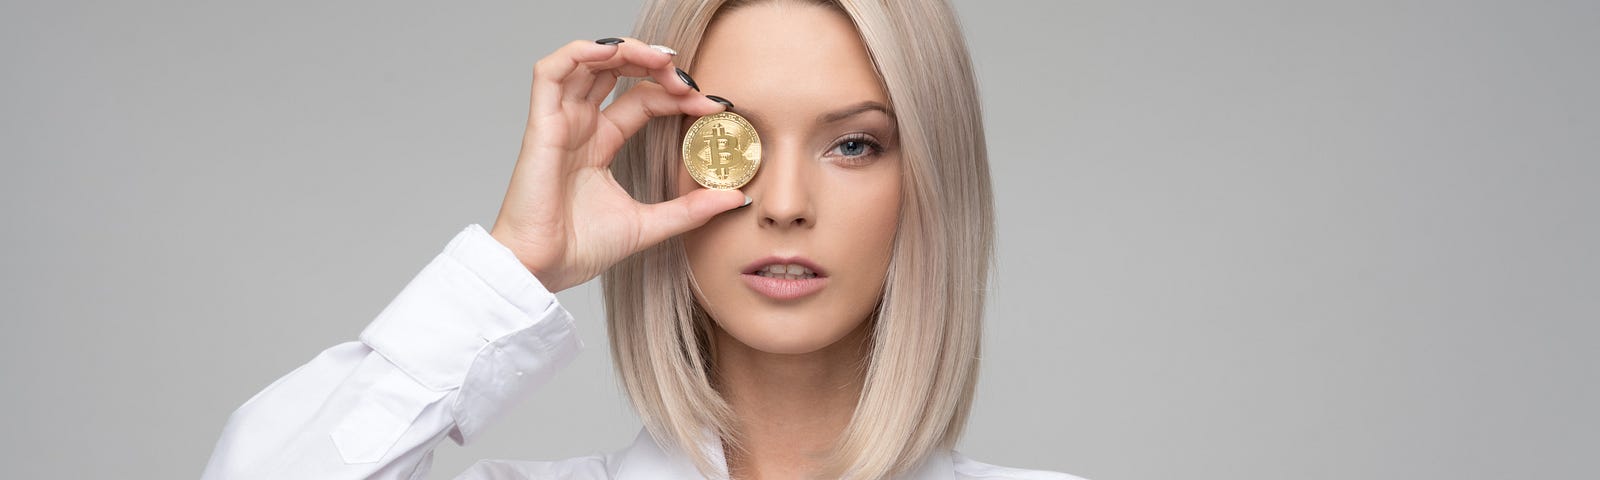 Blonde woman holding gold coin to her eye.